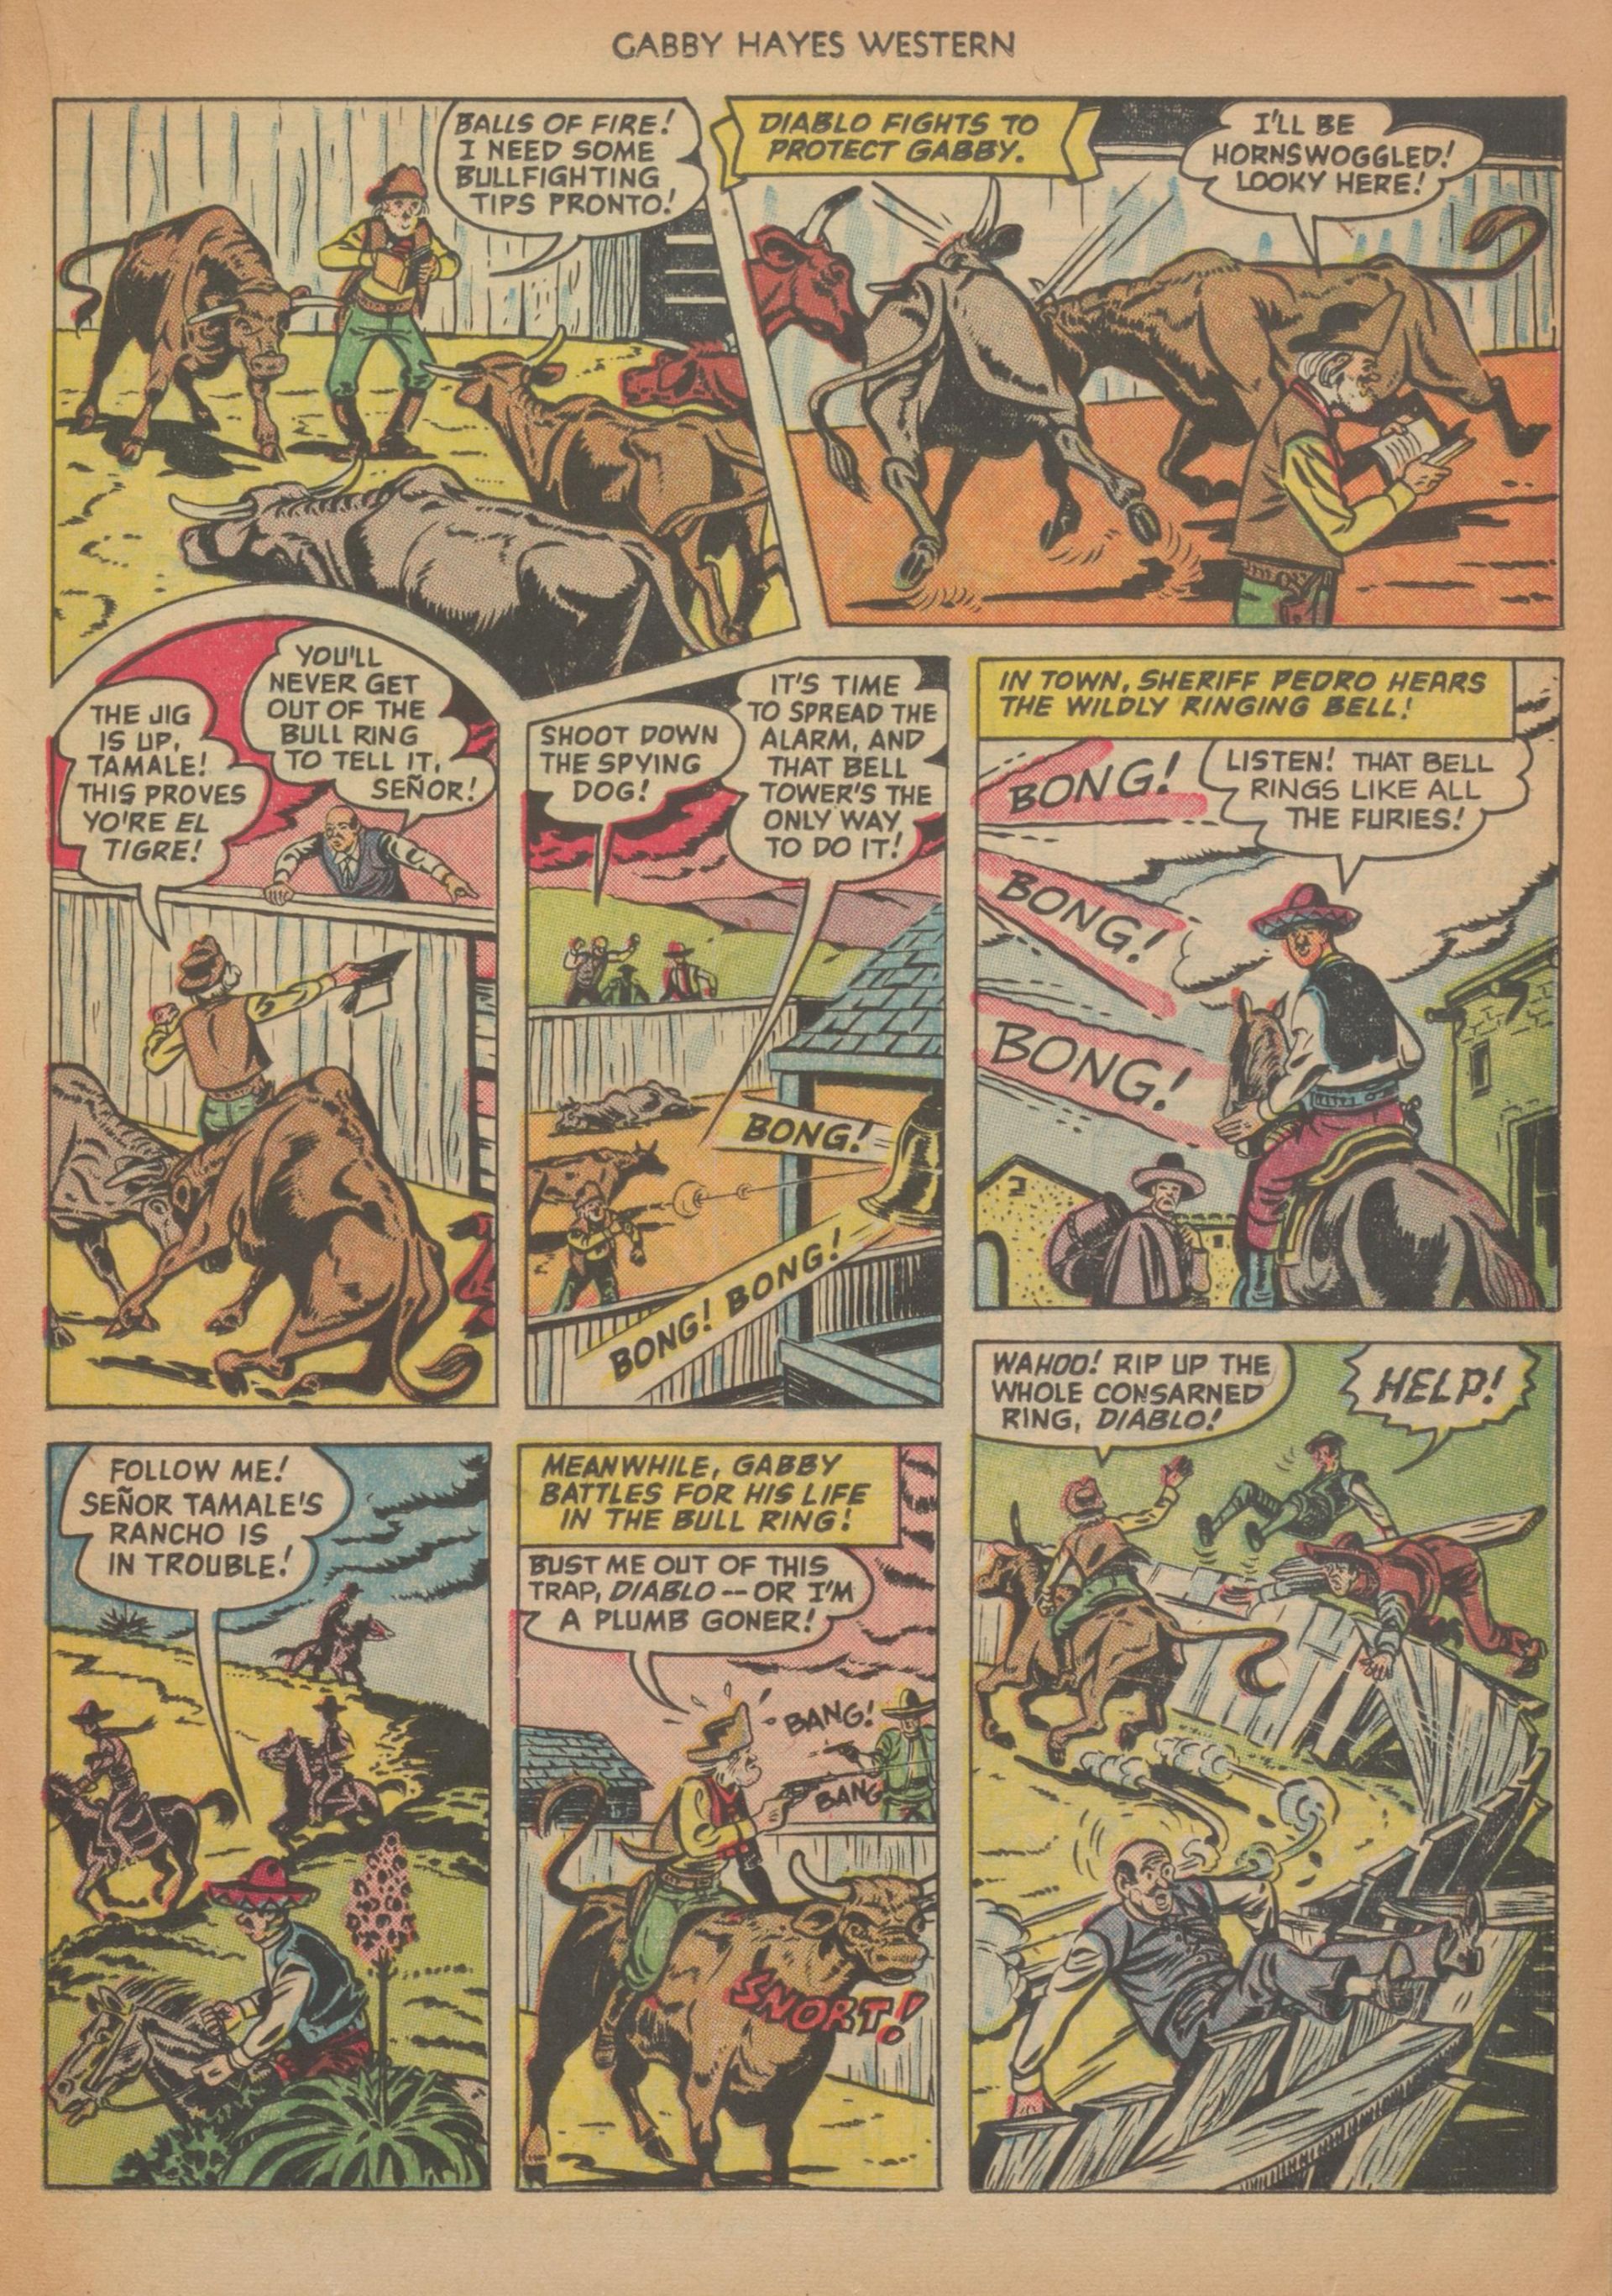 Read online Gabby Hayes Western comic -  Issue #39 - 21